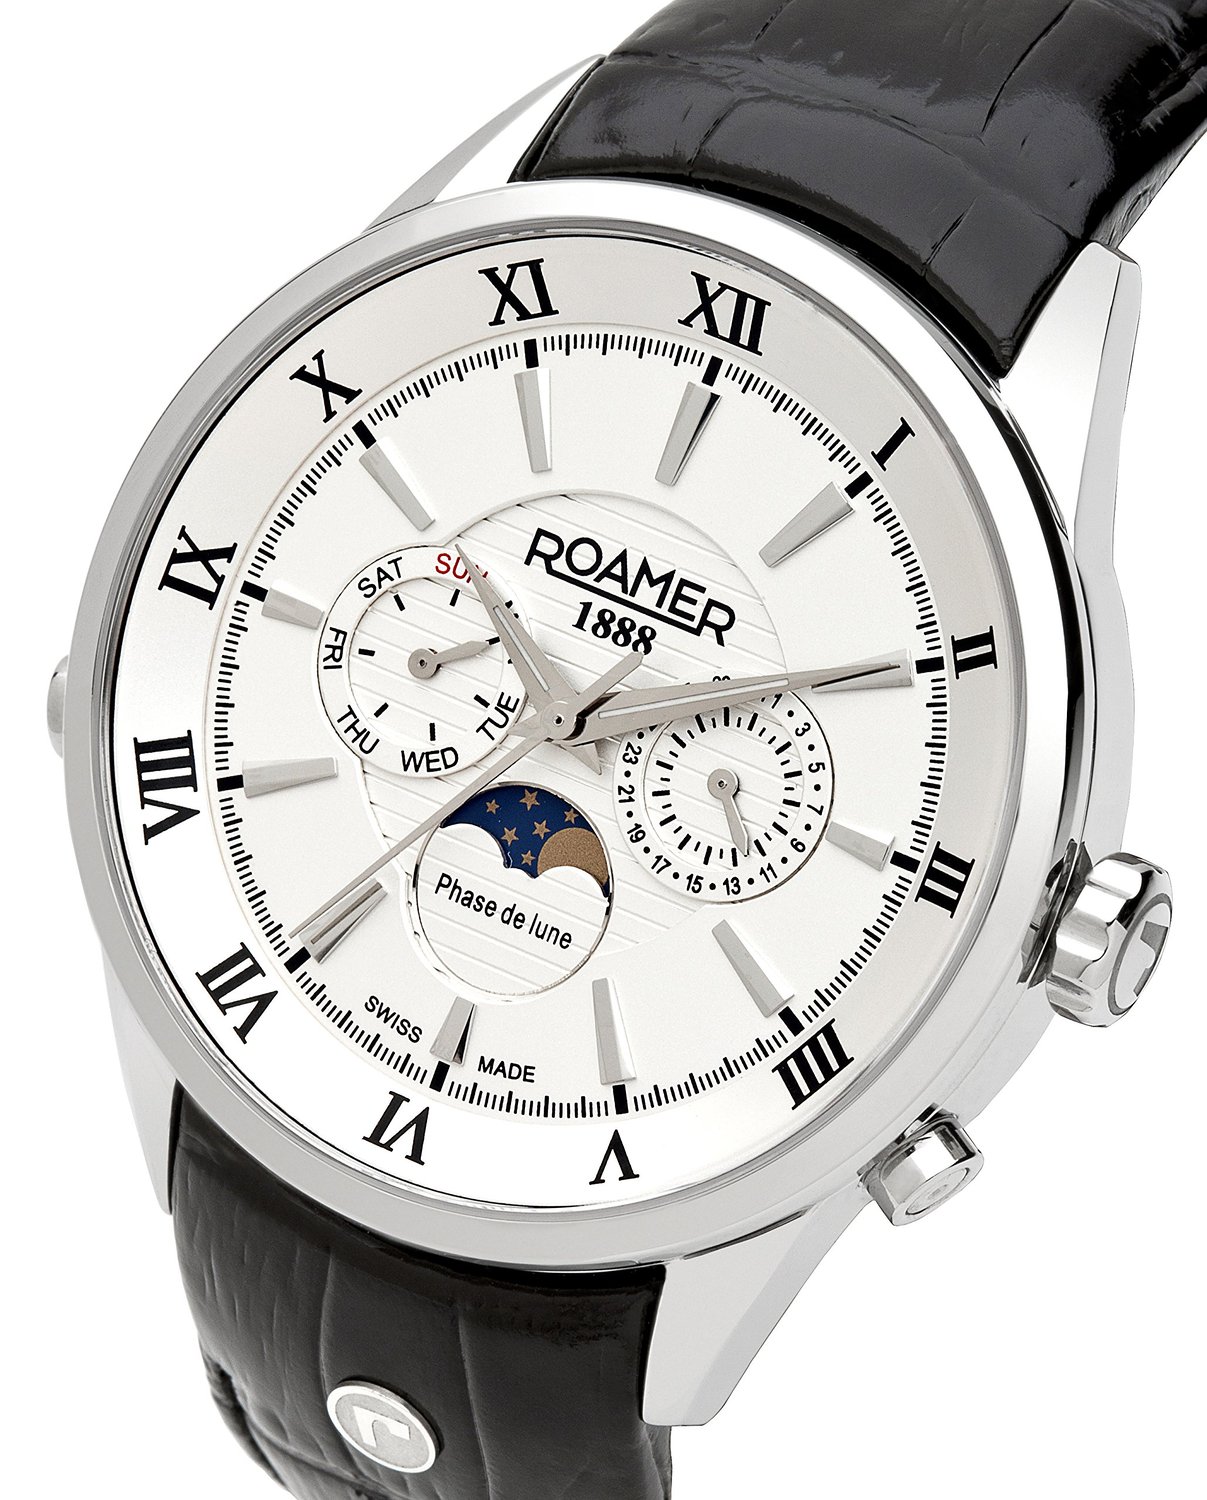 Roamer of Switzerland Superior Moonphase Men's Quartz Watch with White Dial Chronograph Display and Black Leather Strap 508821 41 13 05